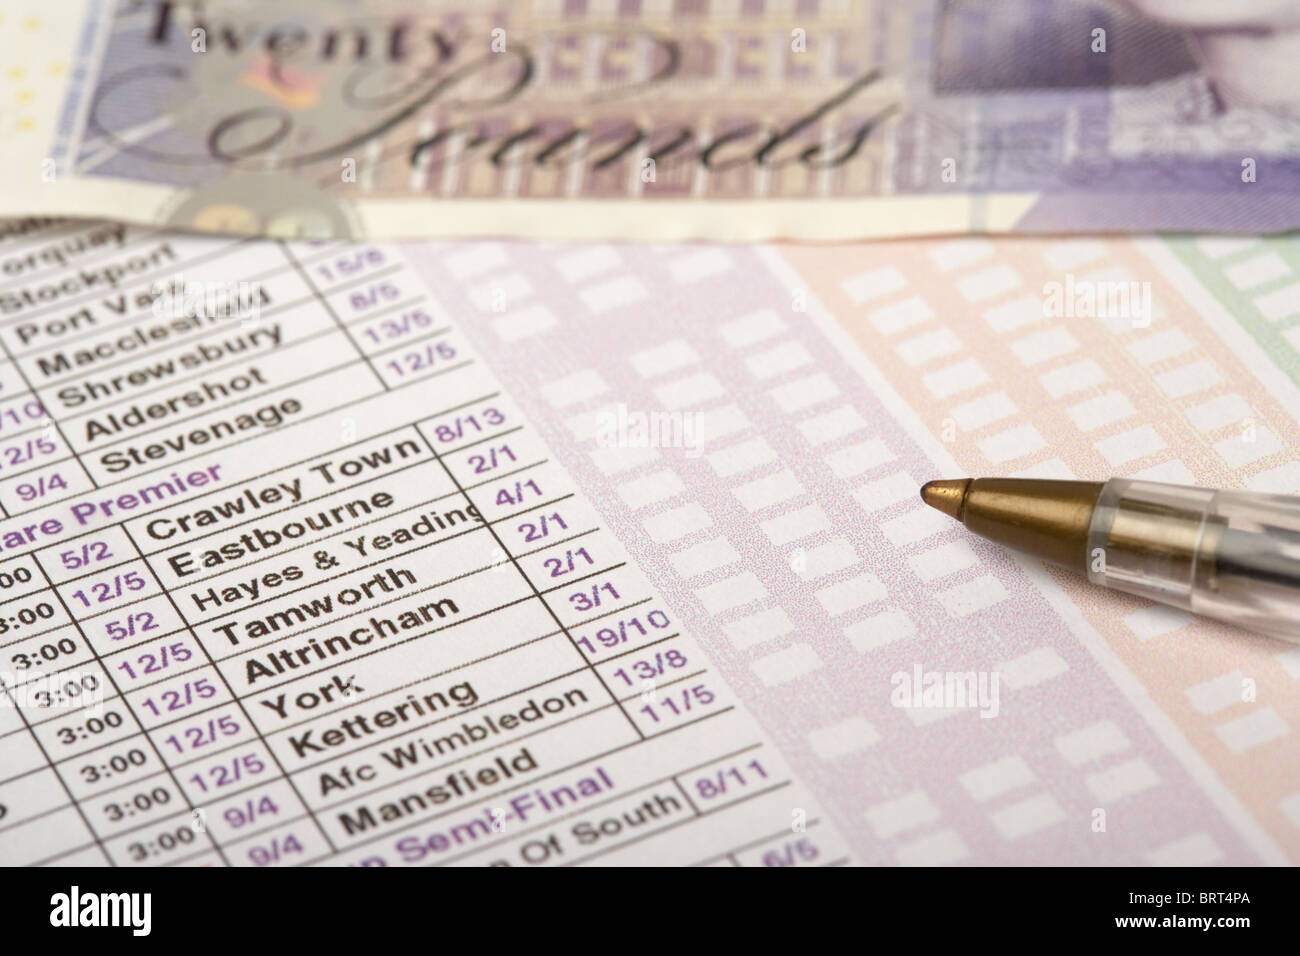 football betting slip from a bookmakers with pen and twenty pound note Stock Photo